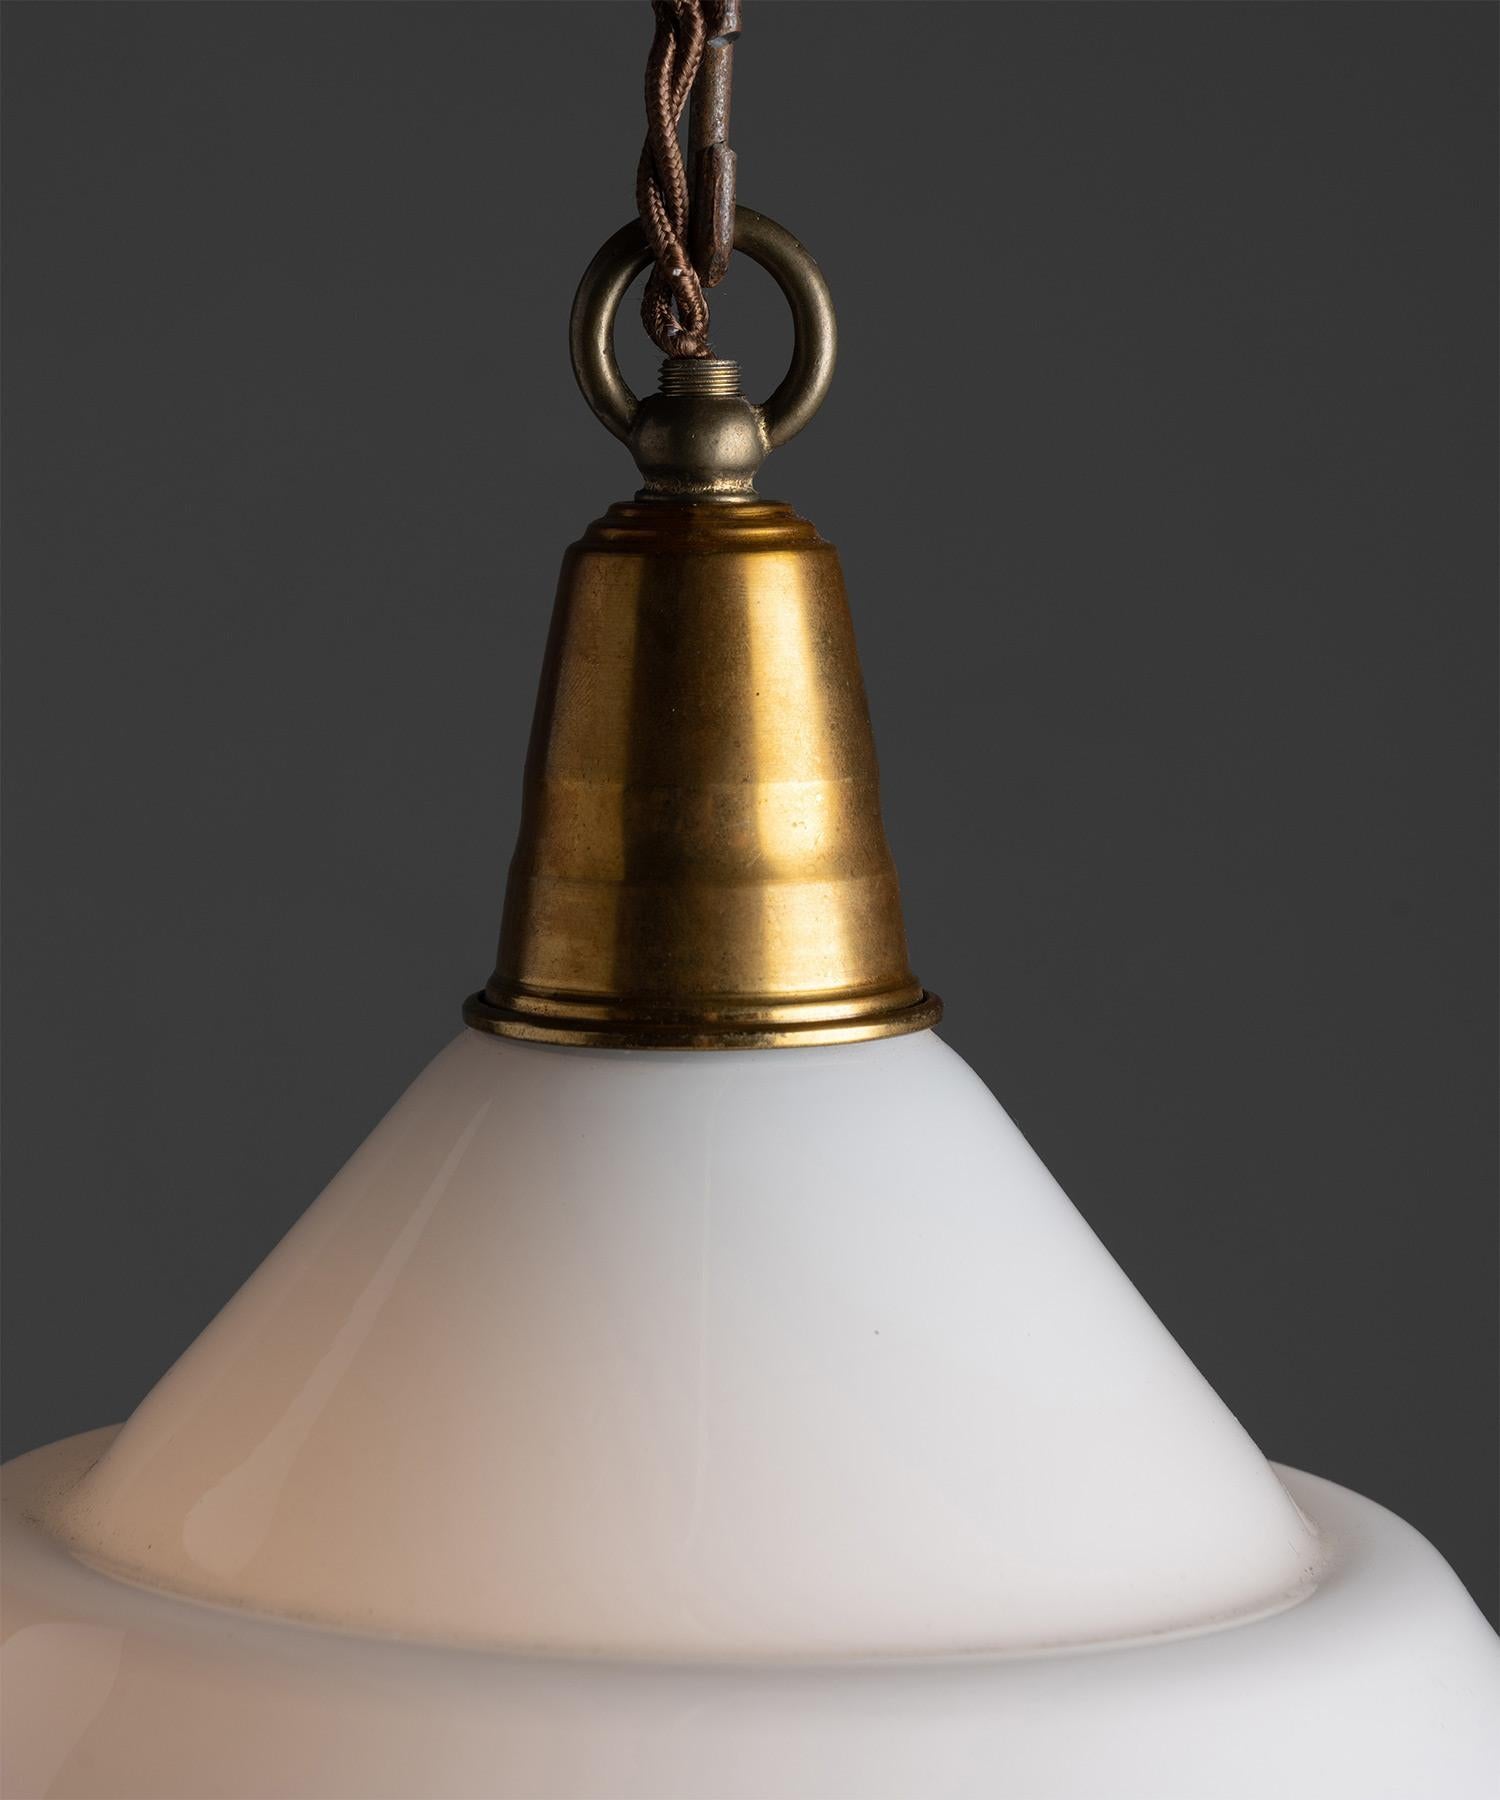 *Please note the price is per unit, and the lights are sold individually*

Opaline & clear conical pendant.

Europe Circa 1950

Opaline and clear glassed open bottom pendant with brass fitters.

Measures: 15.5